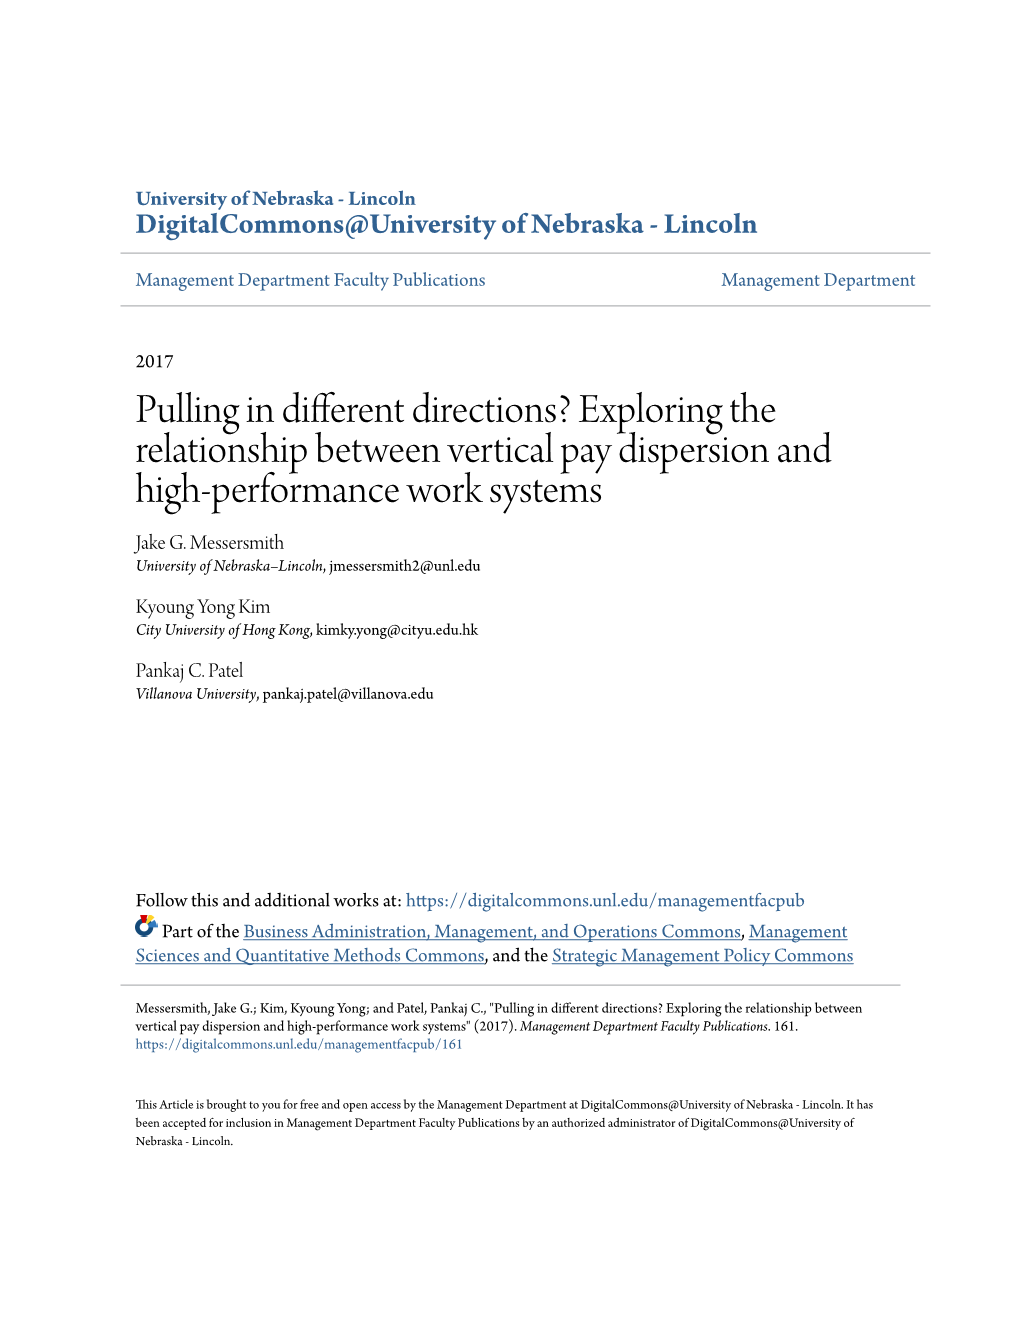 Exploring the Relationship Between Vertical Pay Dispersion and High-Performance Work Systems Jake G